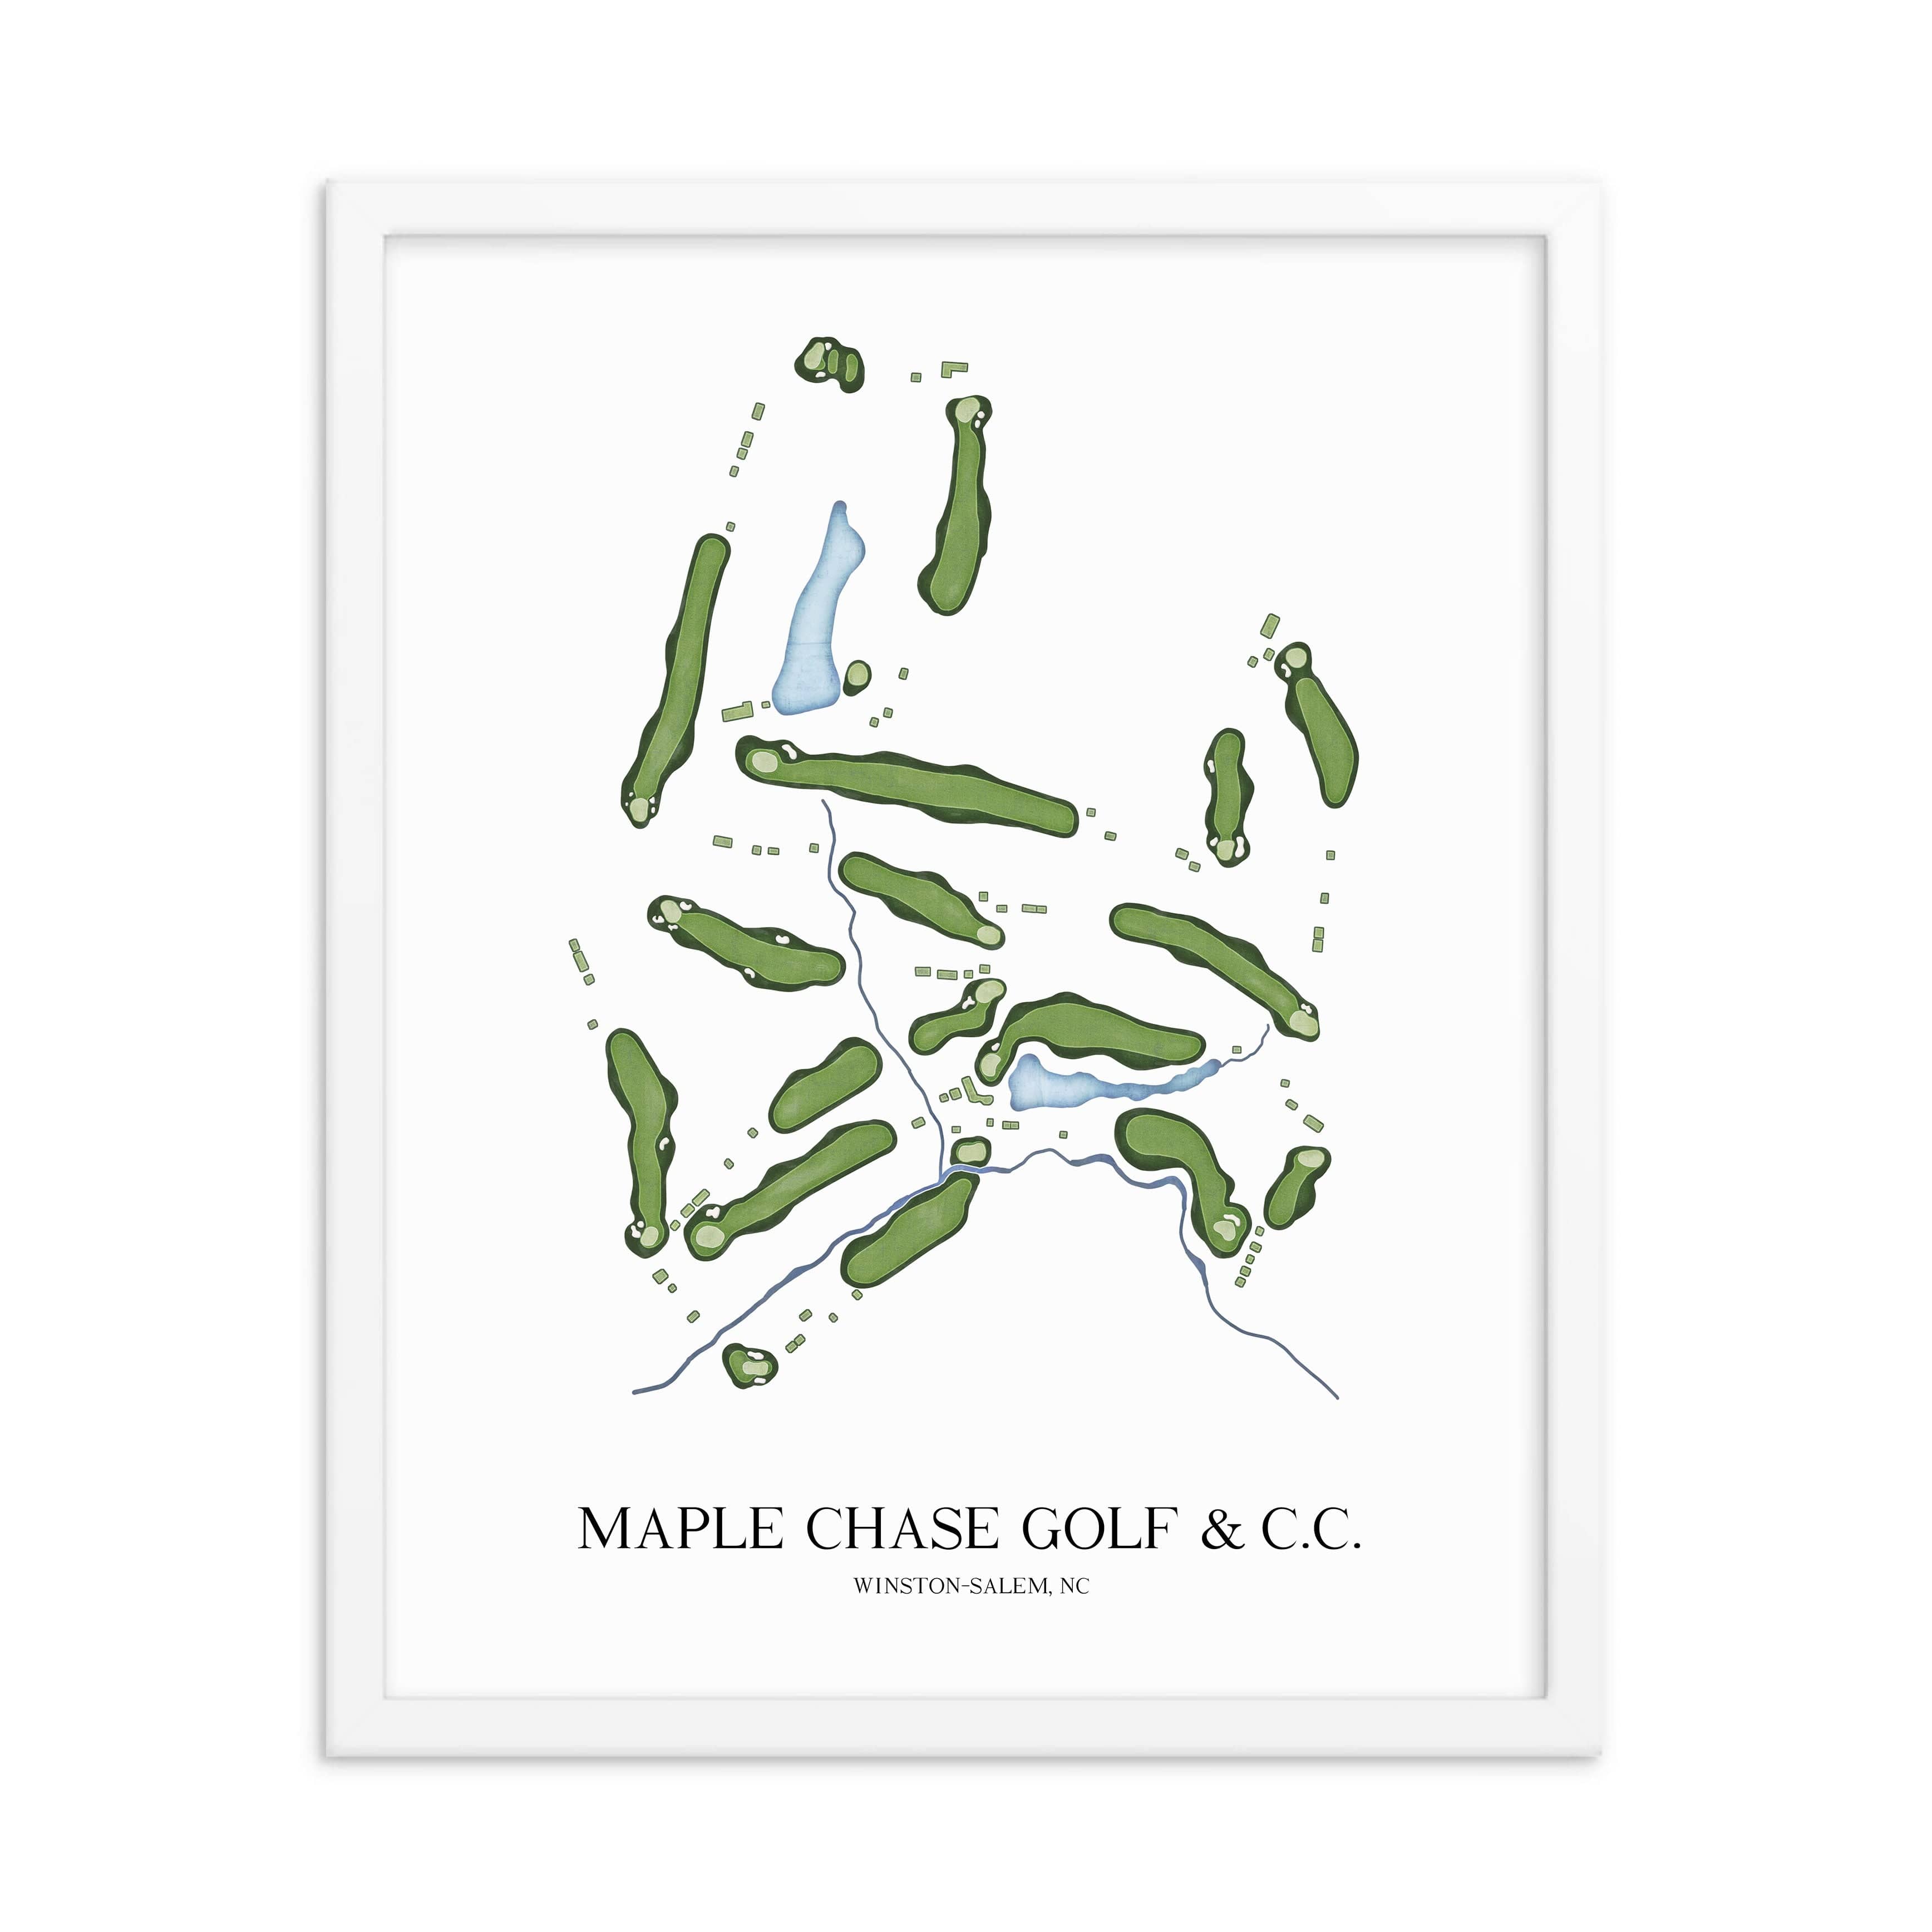 The 19th Hole Golf Shop - Golf Course Prints -  Maple Chase Golf and Country Club Golf Course Map